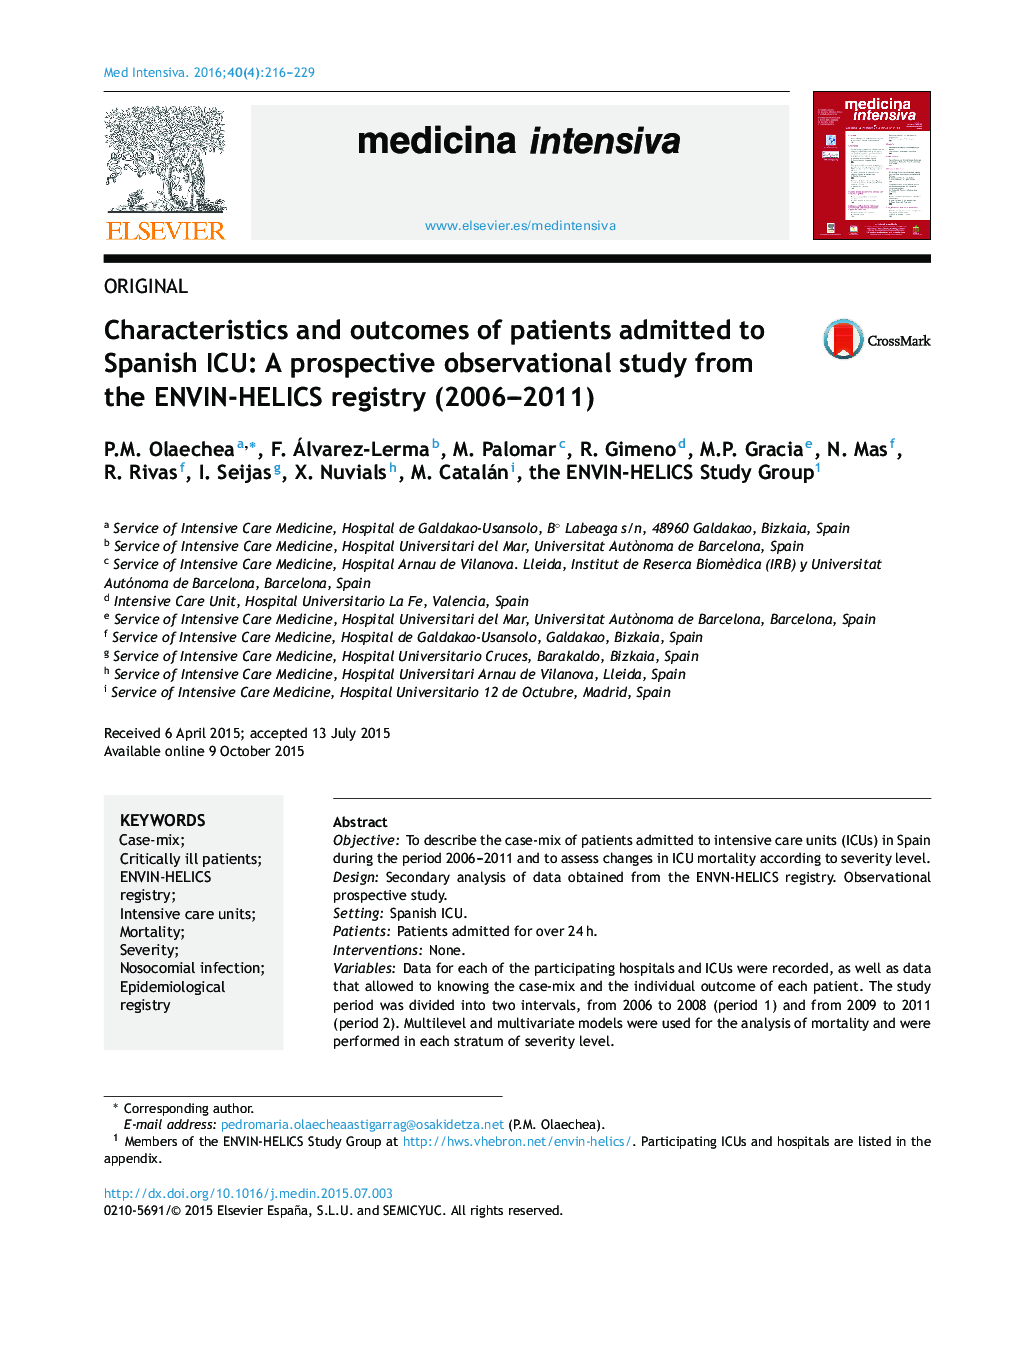 Characteristics and outcomes of patients admitted to Spanish ICU: A prospective observational study from the ENVIN-HELICS registry (2006-2011)